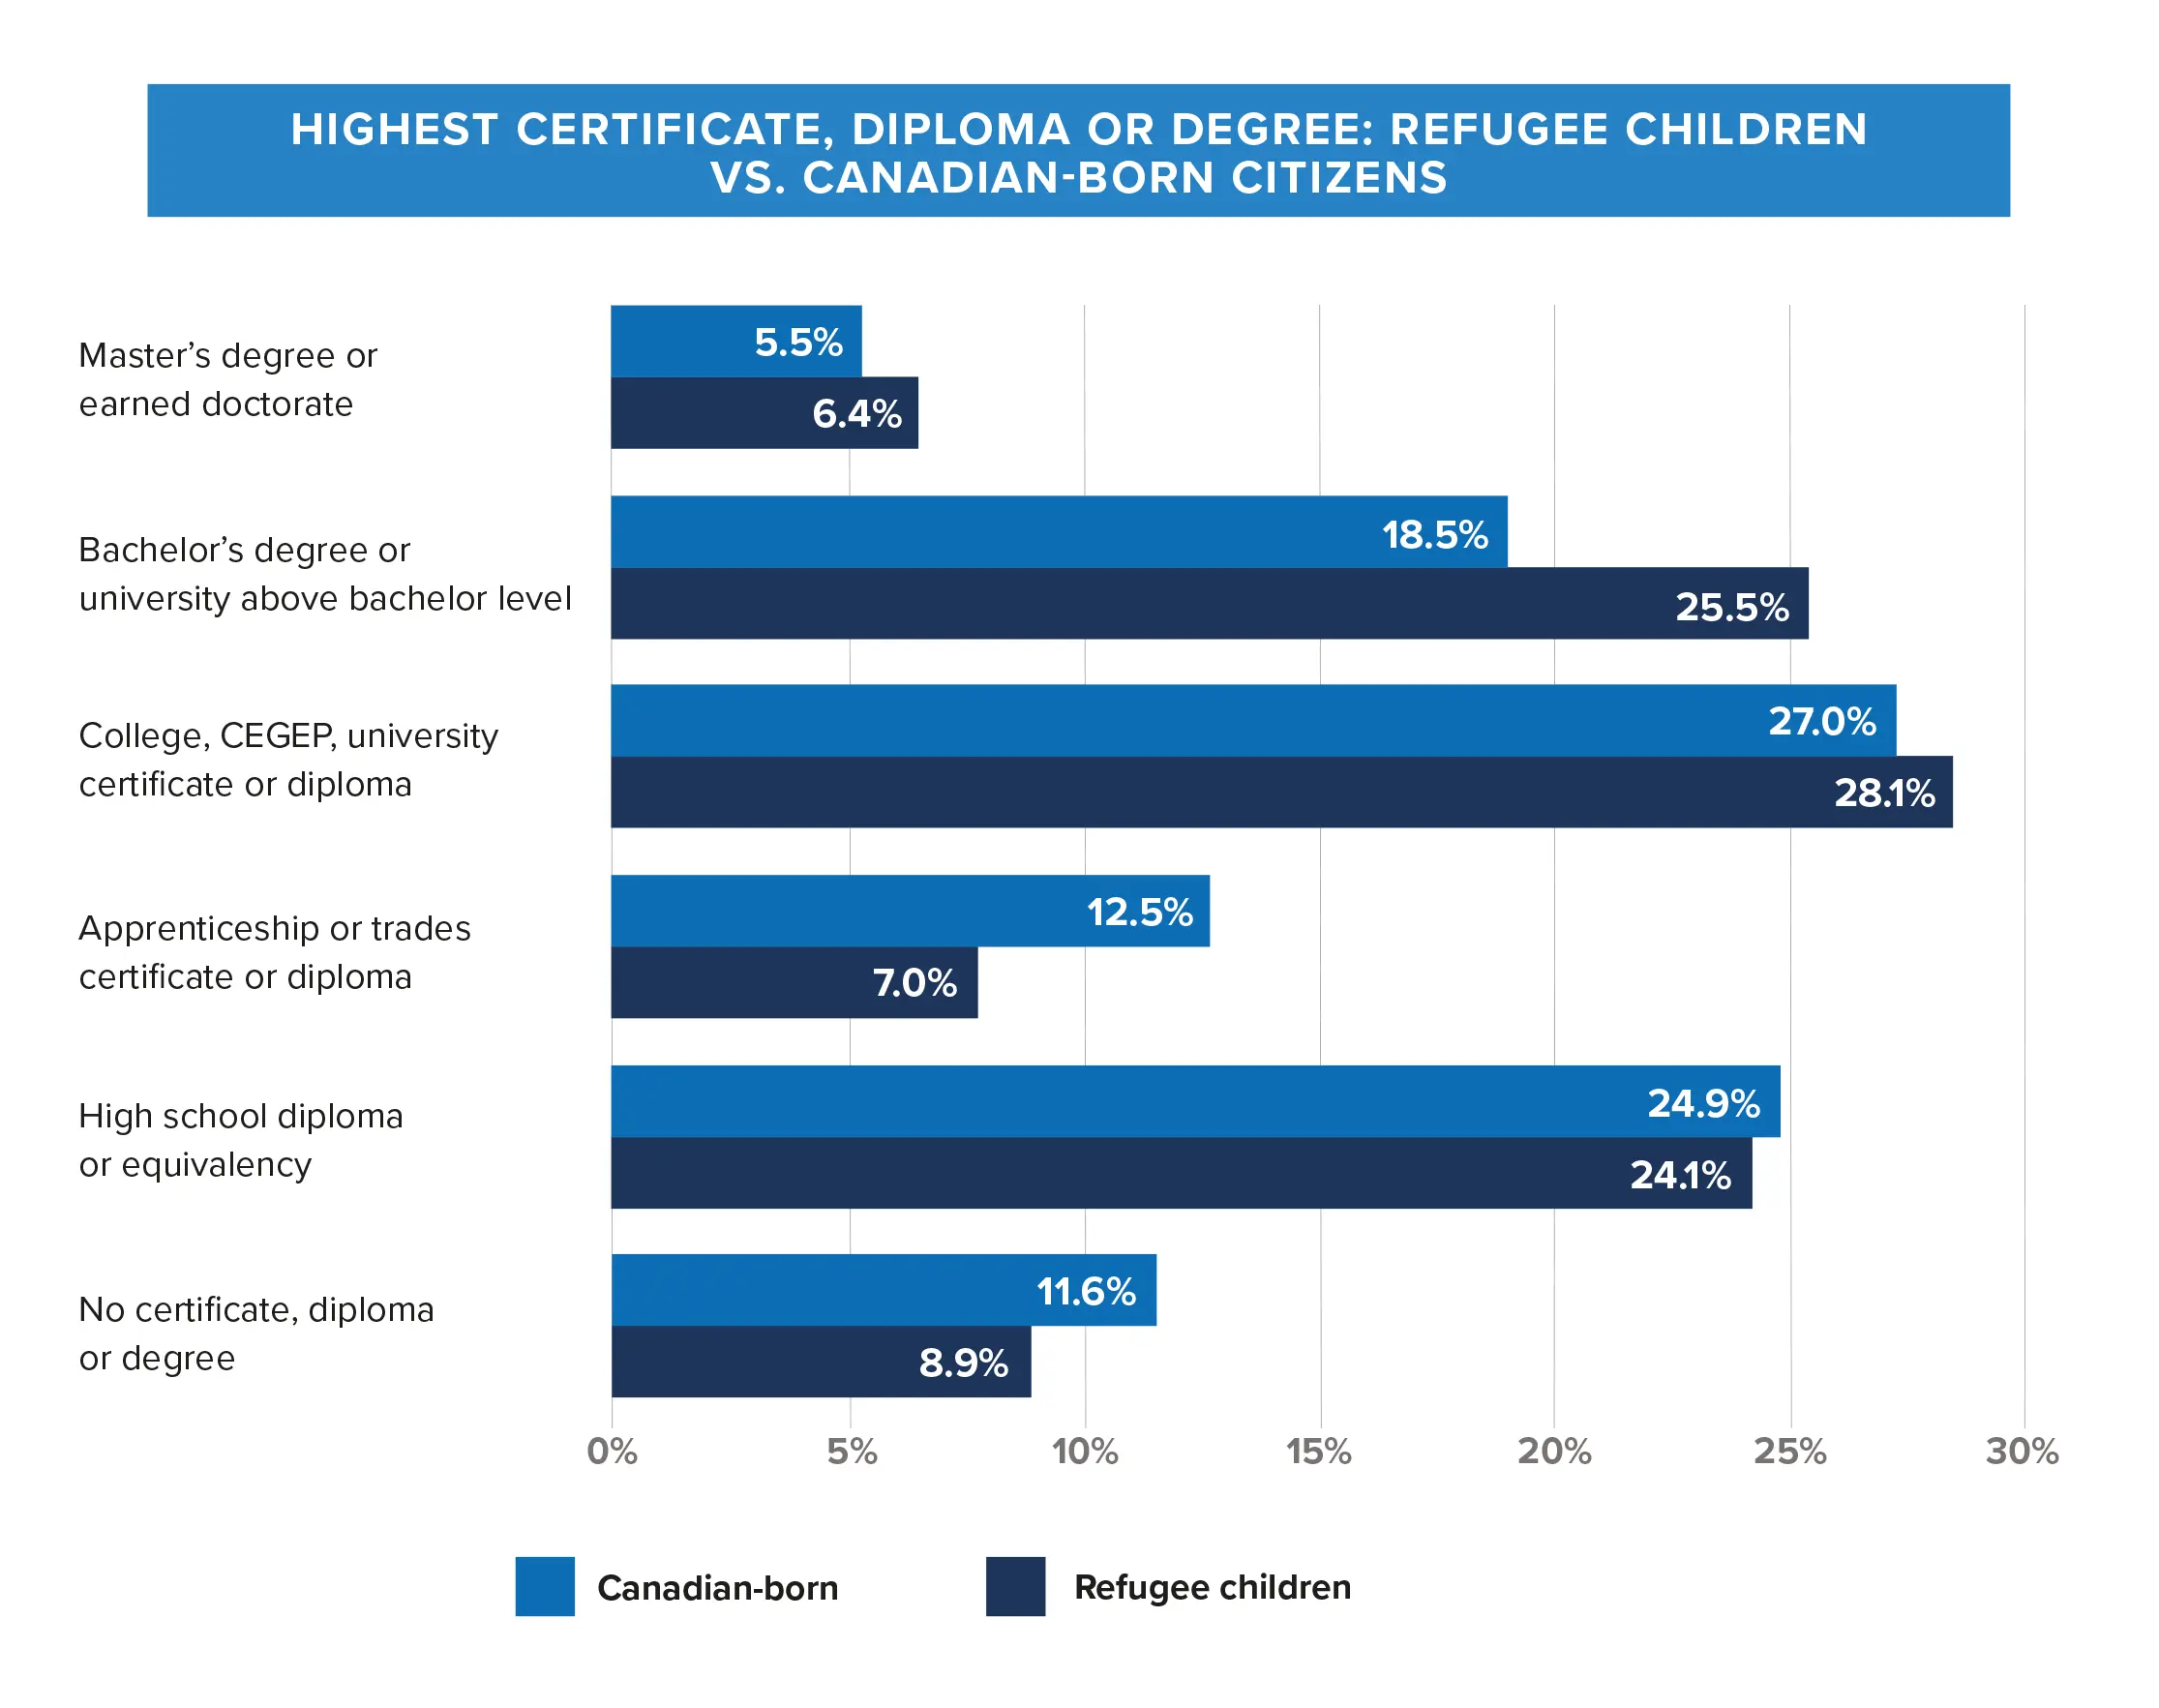 Graph showing the percentage of refugee children with the highest certificate, diploma or degree, versus Canadin-born citizens.